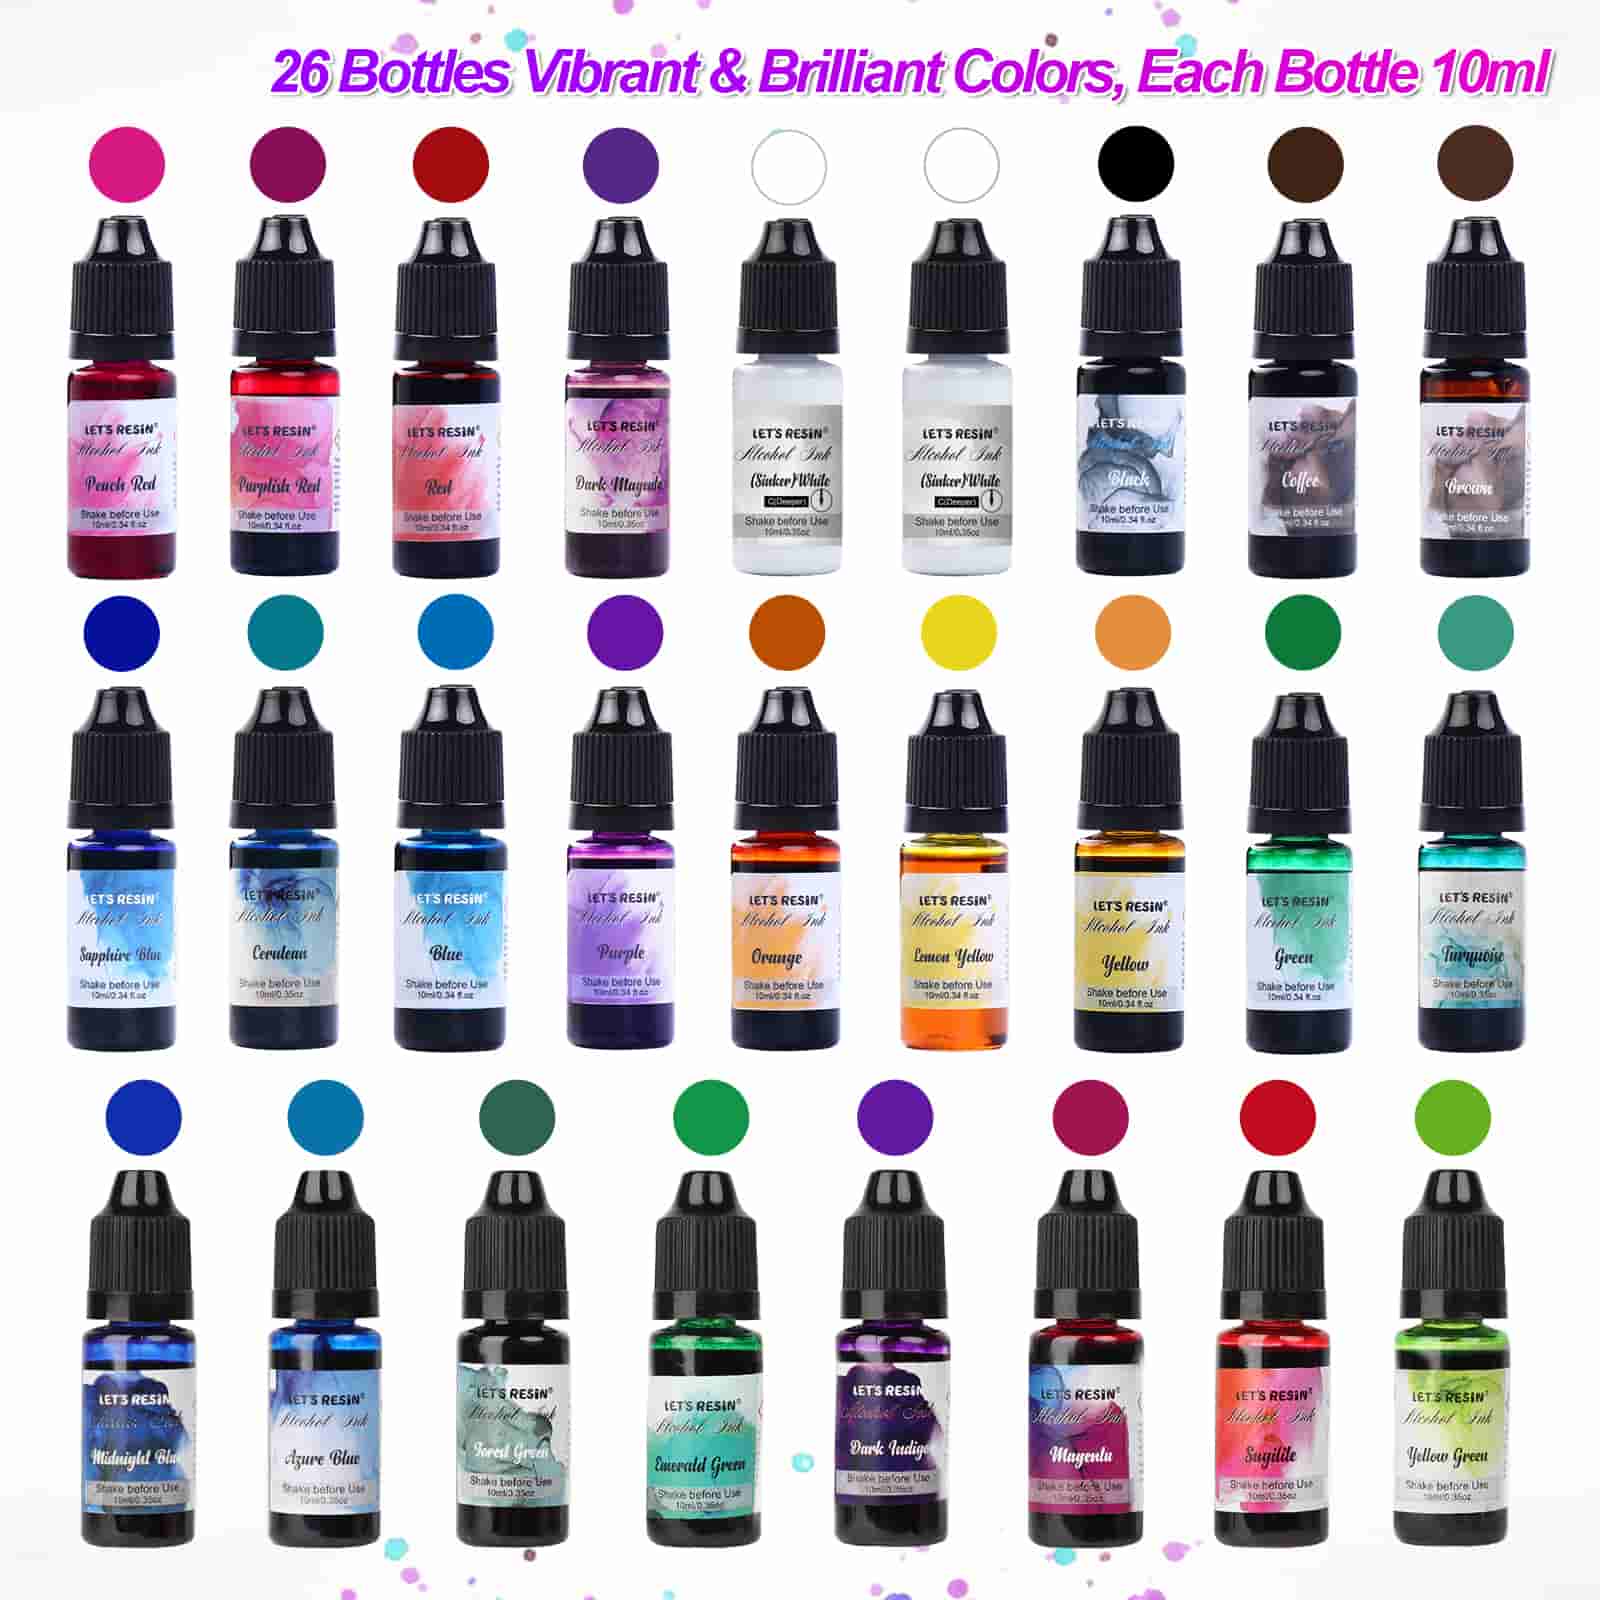 White Alcohol Ink - 4.2-oz Bottle - Vibrant Highly Concentrated